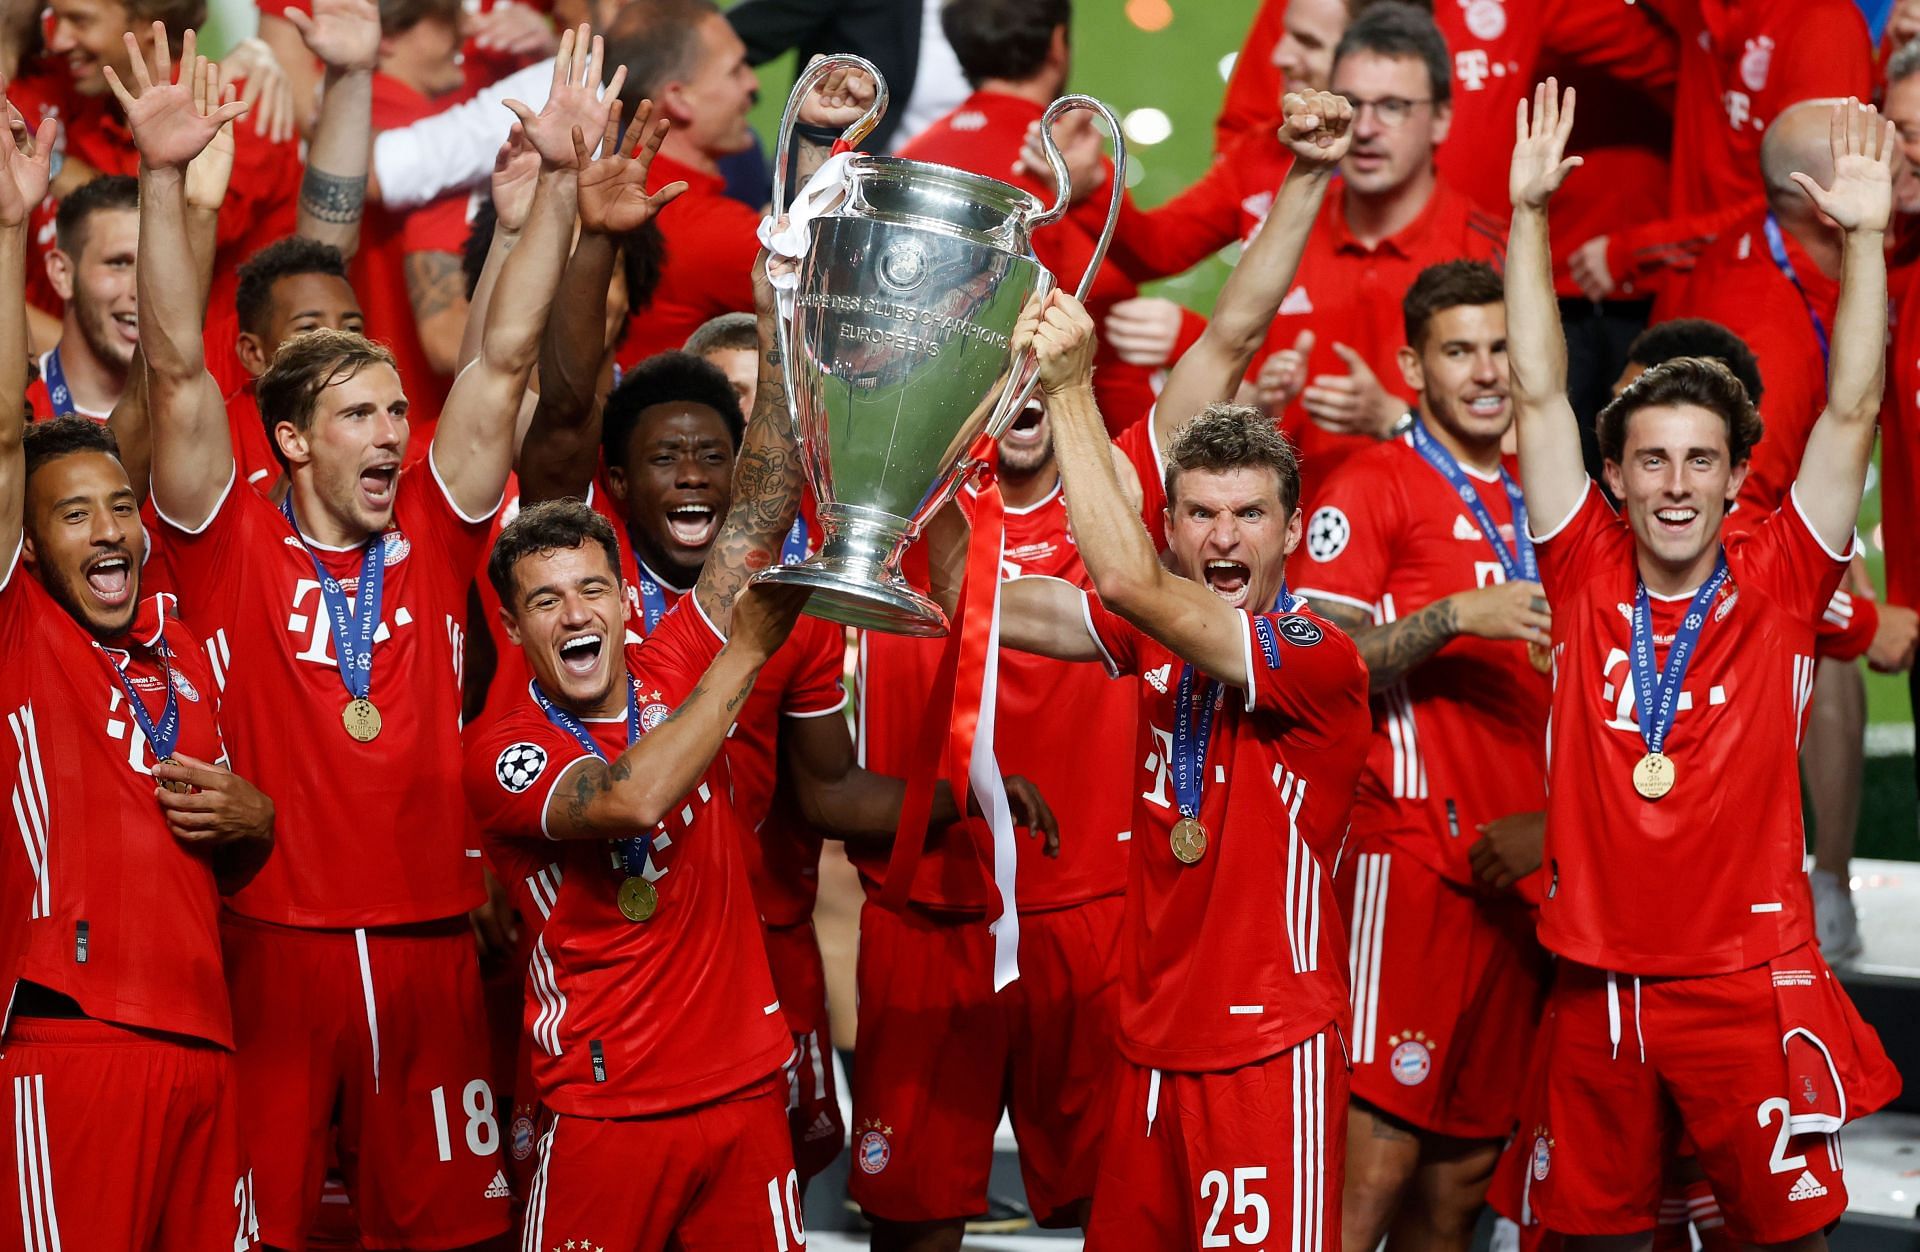 Bayern Munich have the squad to win the tournament this season